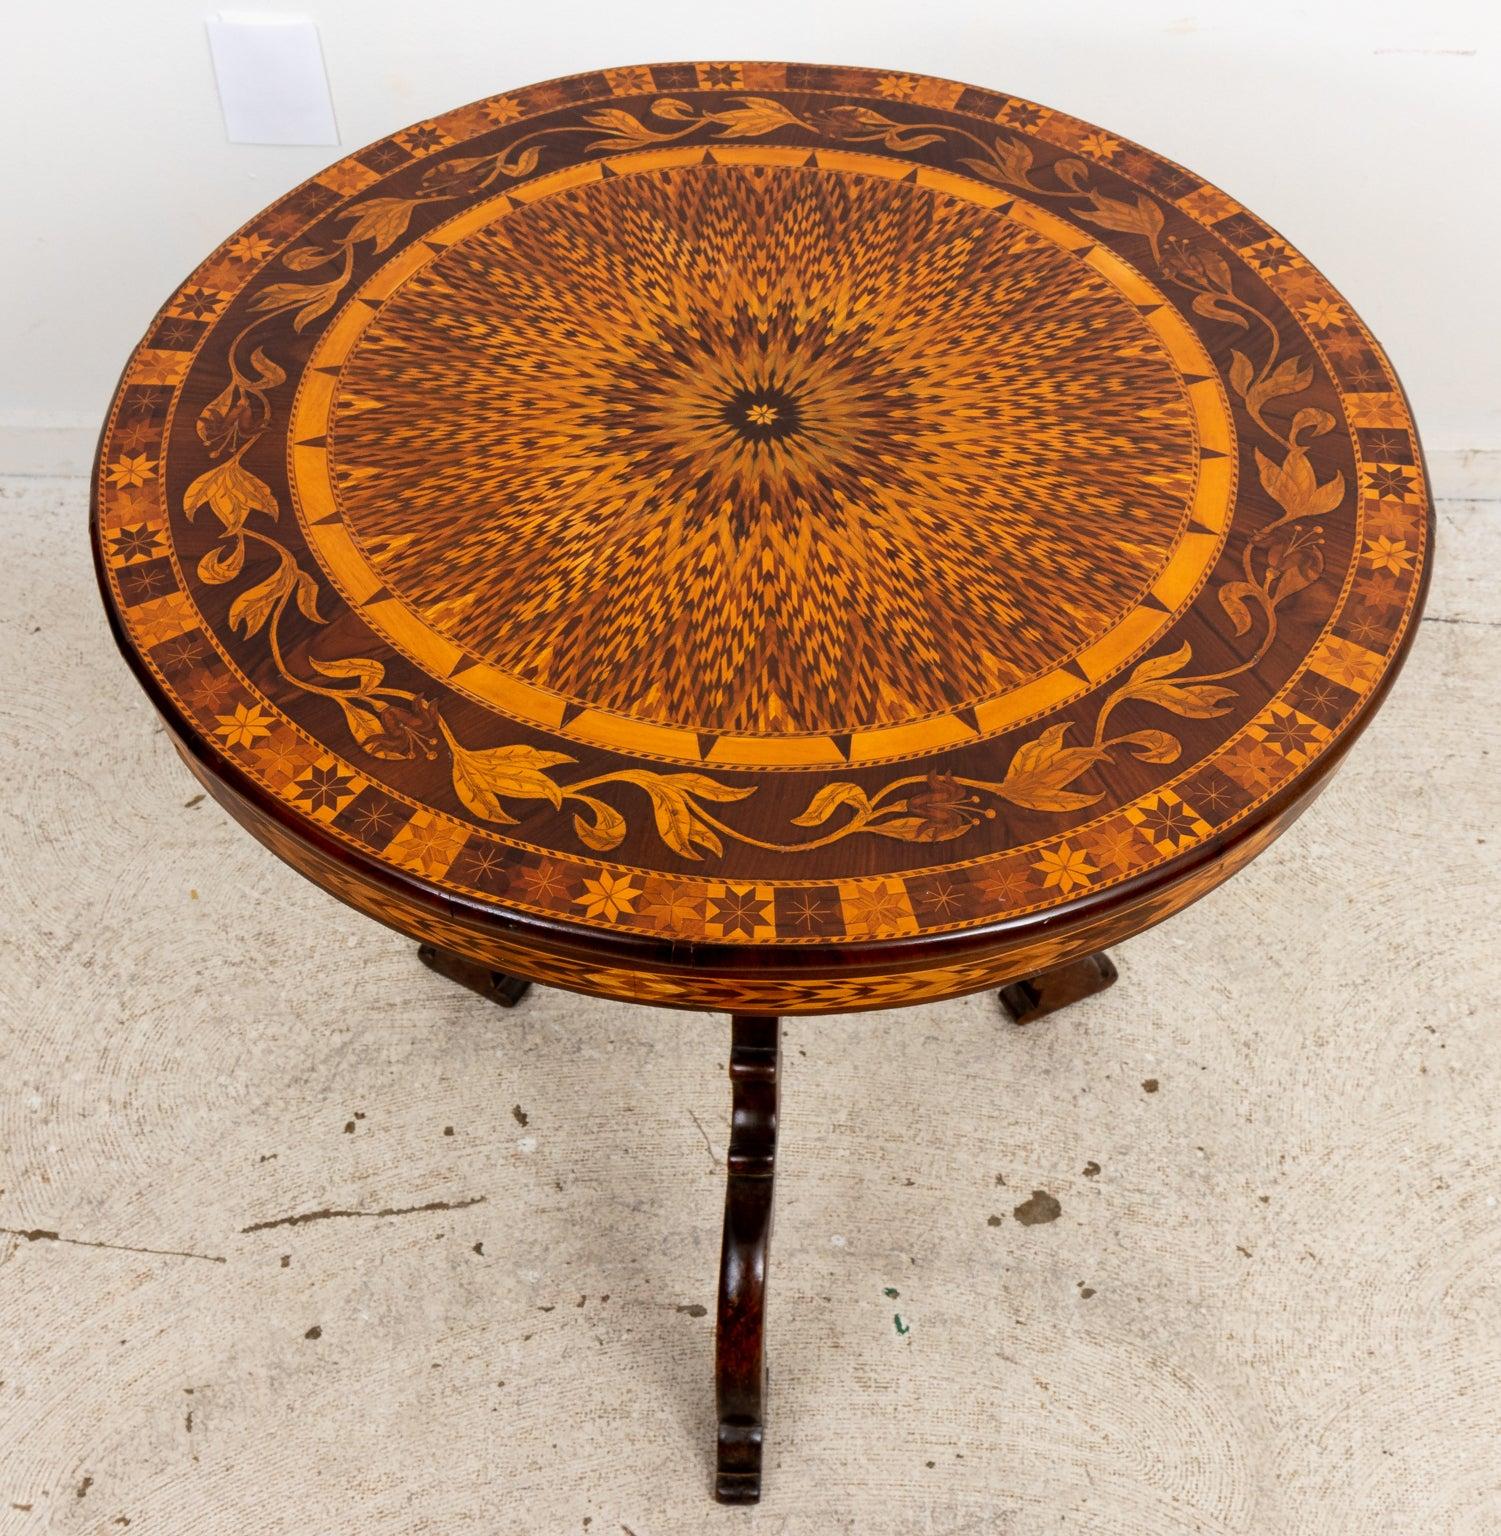 Heavily inlaid marquetry pedestal table with central starburst medallion and encircling vine banding. Please note of wear consistent with age.